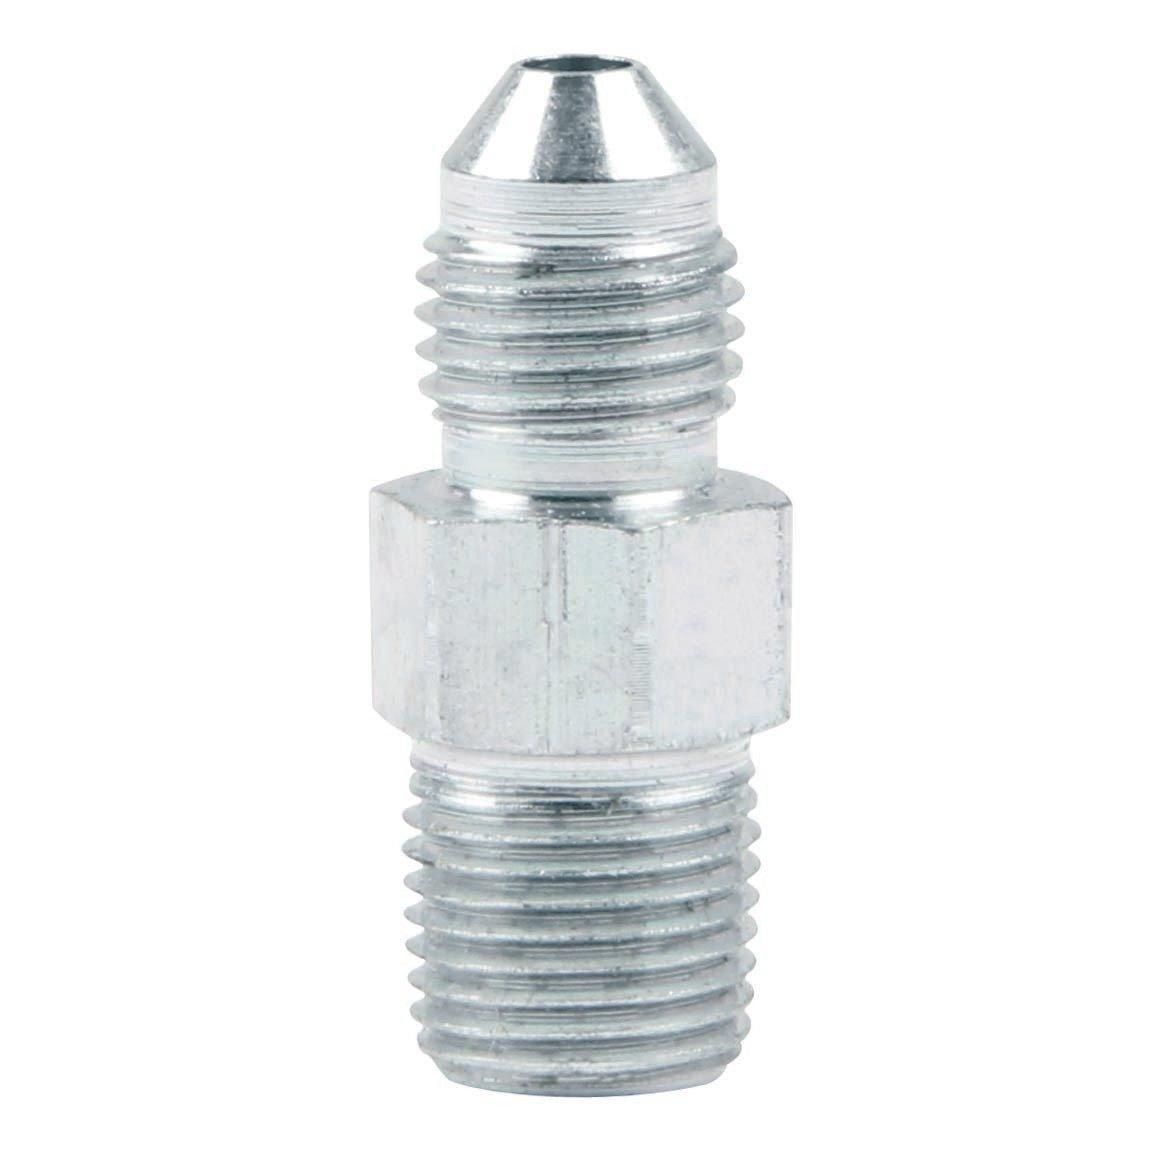 Adapter Fittings -3 to 1/8 NPT 2pk - SMINKpower Performance Parts ALL50000 ALLSTAR PERFORMANCE